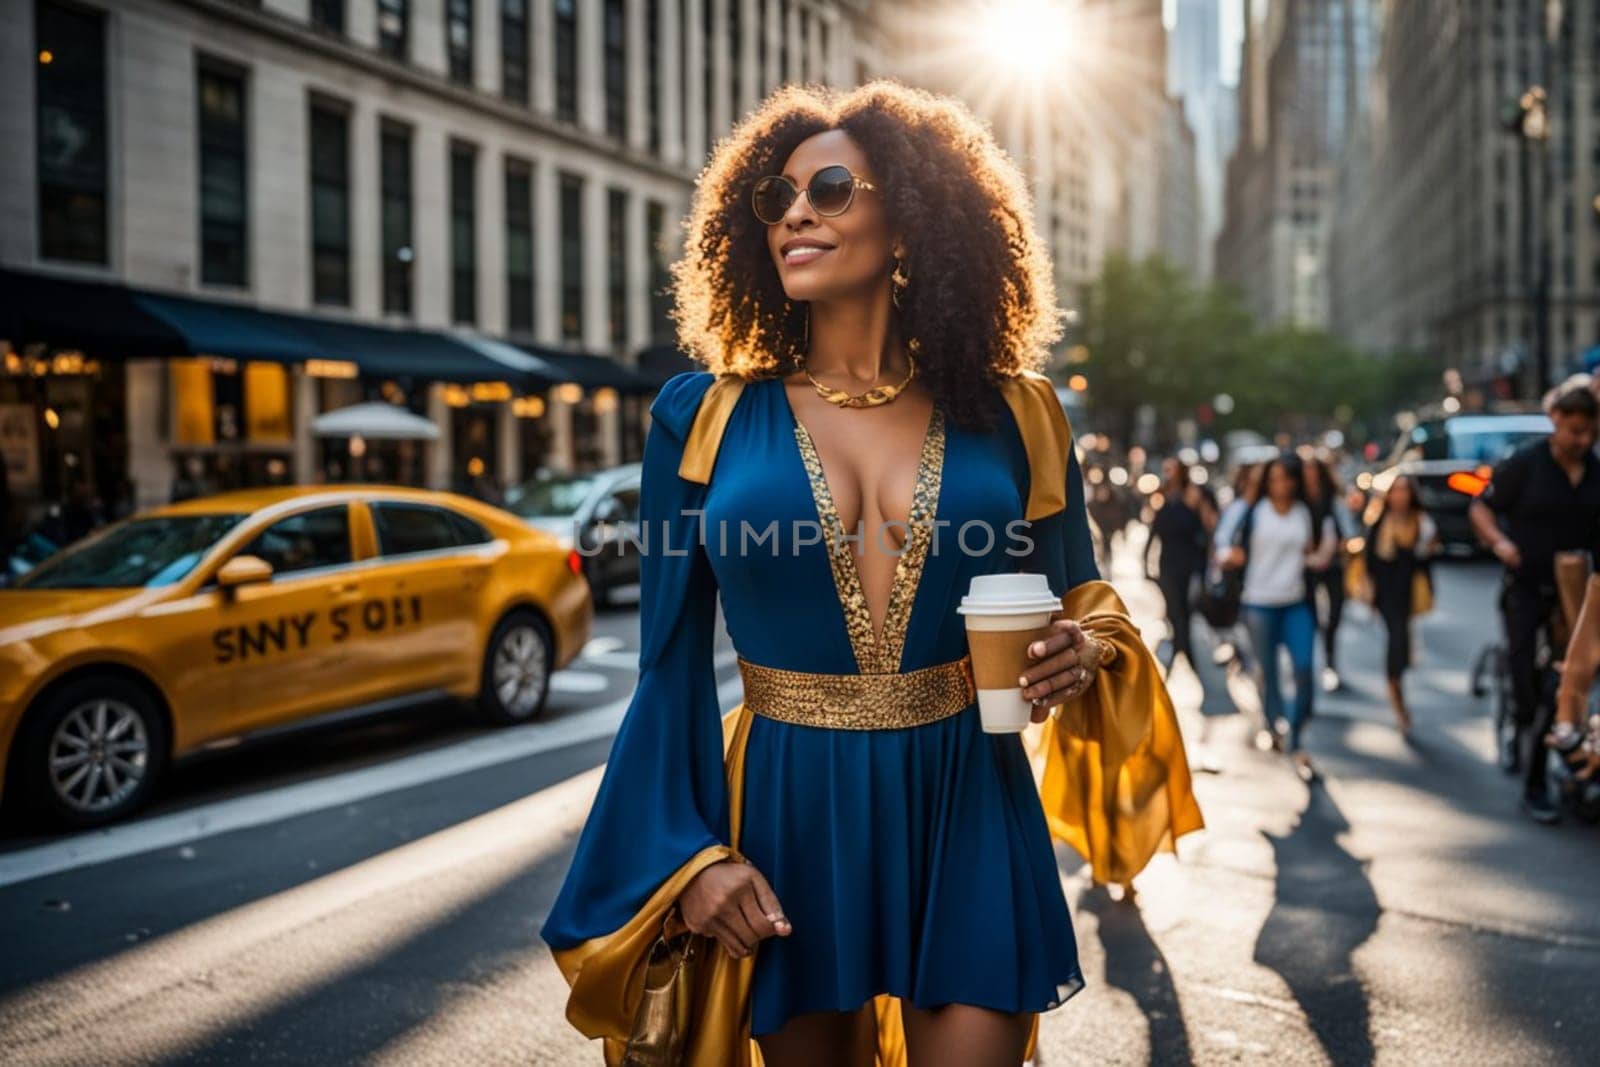 A vibrant fit tall young trans woman in the street, sun glasses, perfect hair , vintage channel style inspired dress, background is new york, 5th avenue.